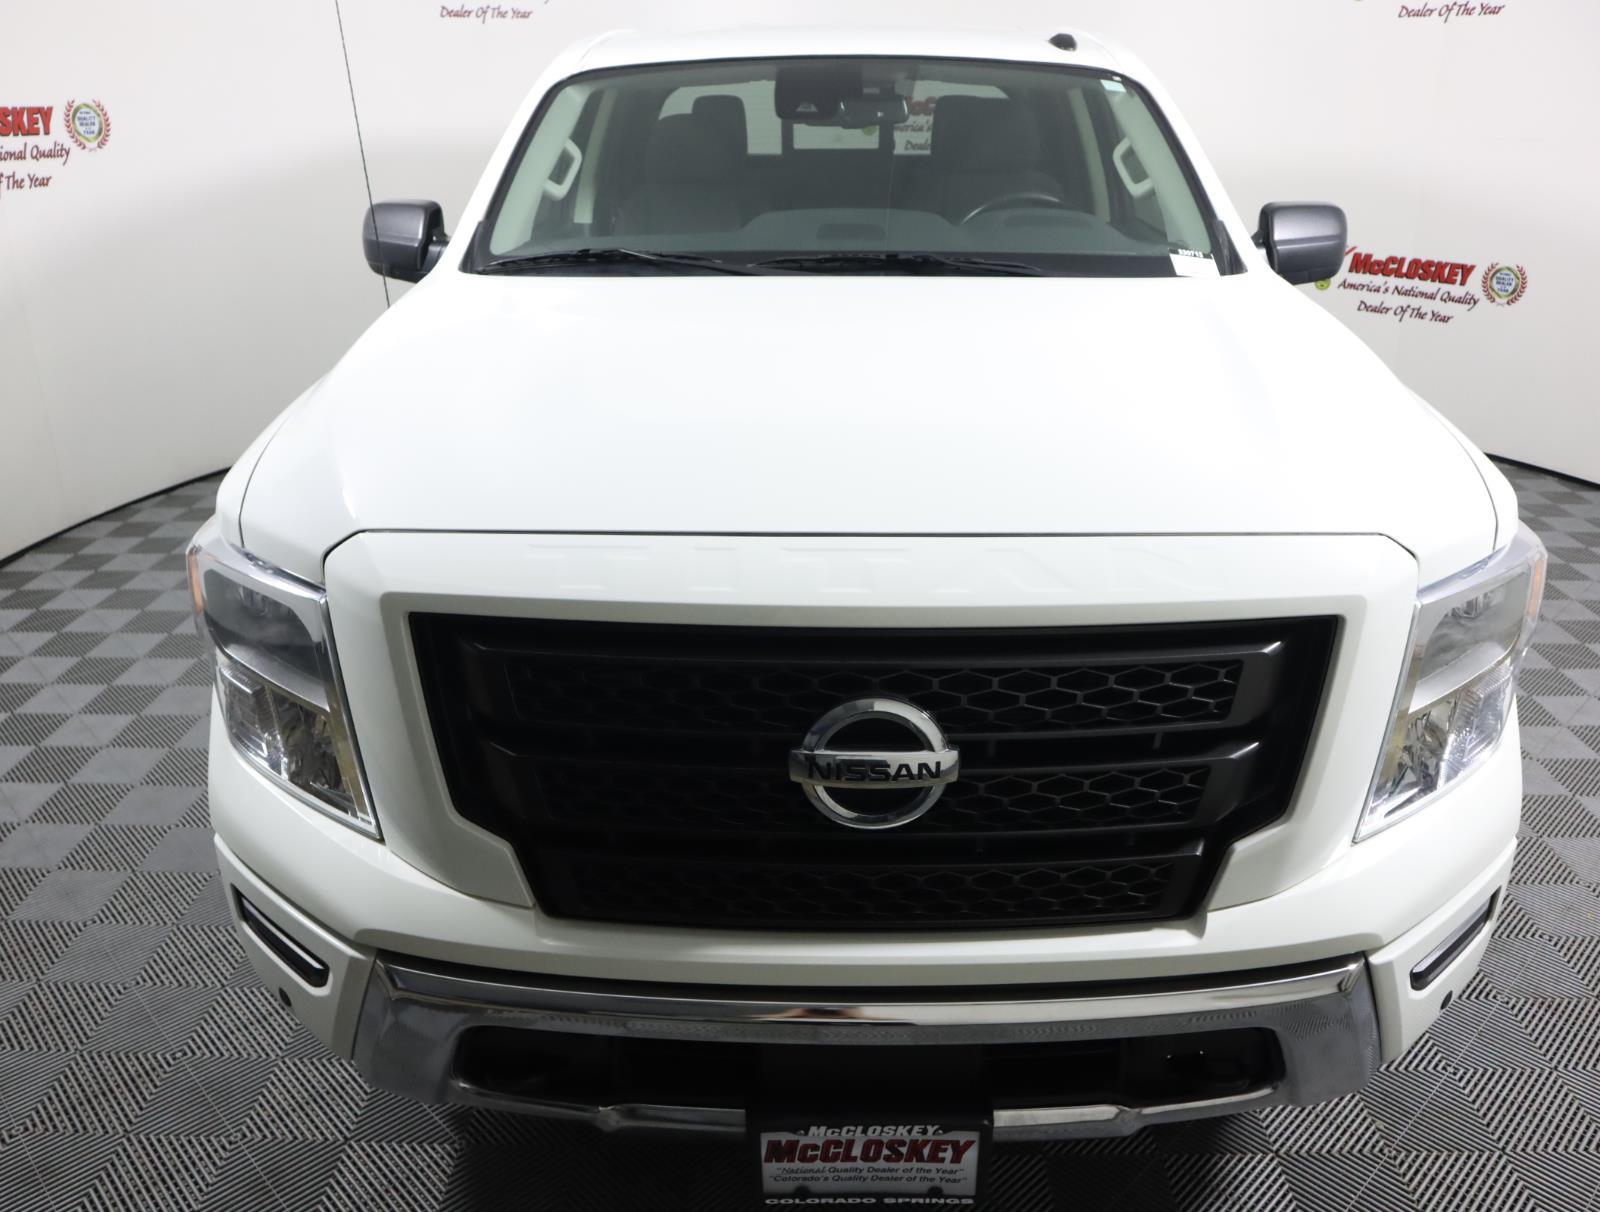 Preowned 2021 NISSAN Titan SV for sale by McCloskey Imports & 4X4's in Colorado Springs, CO